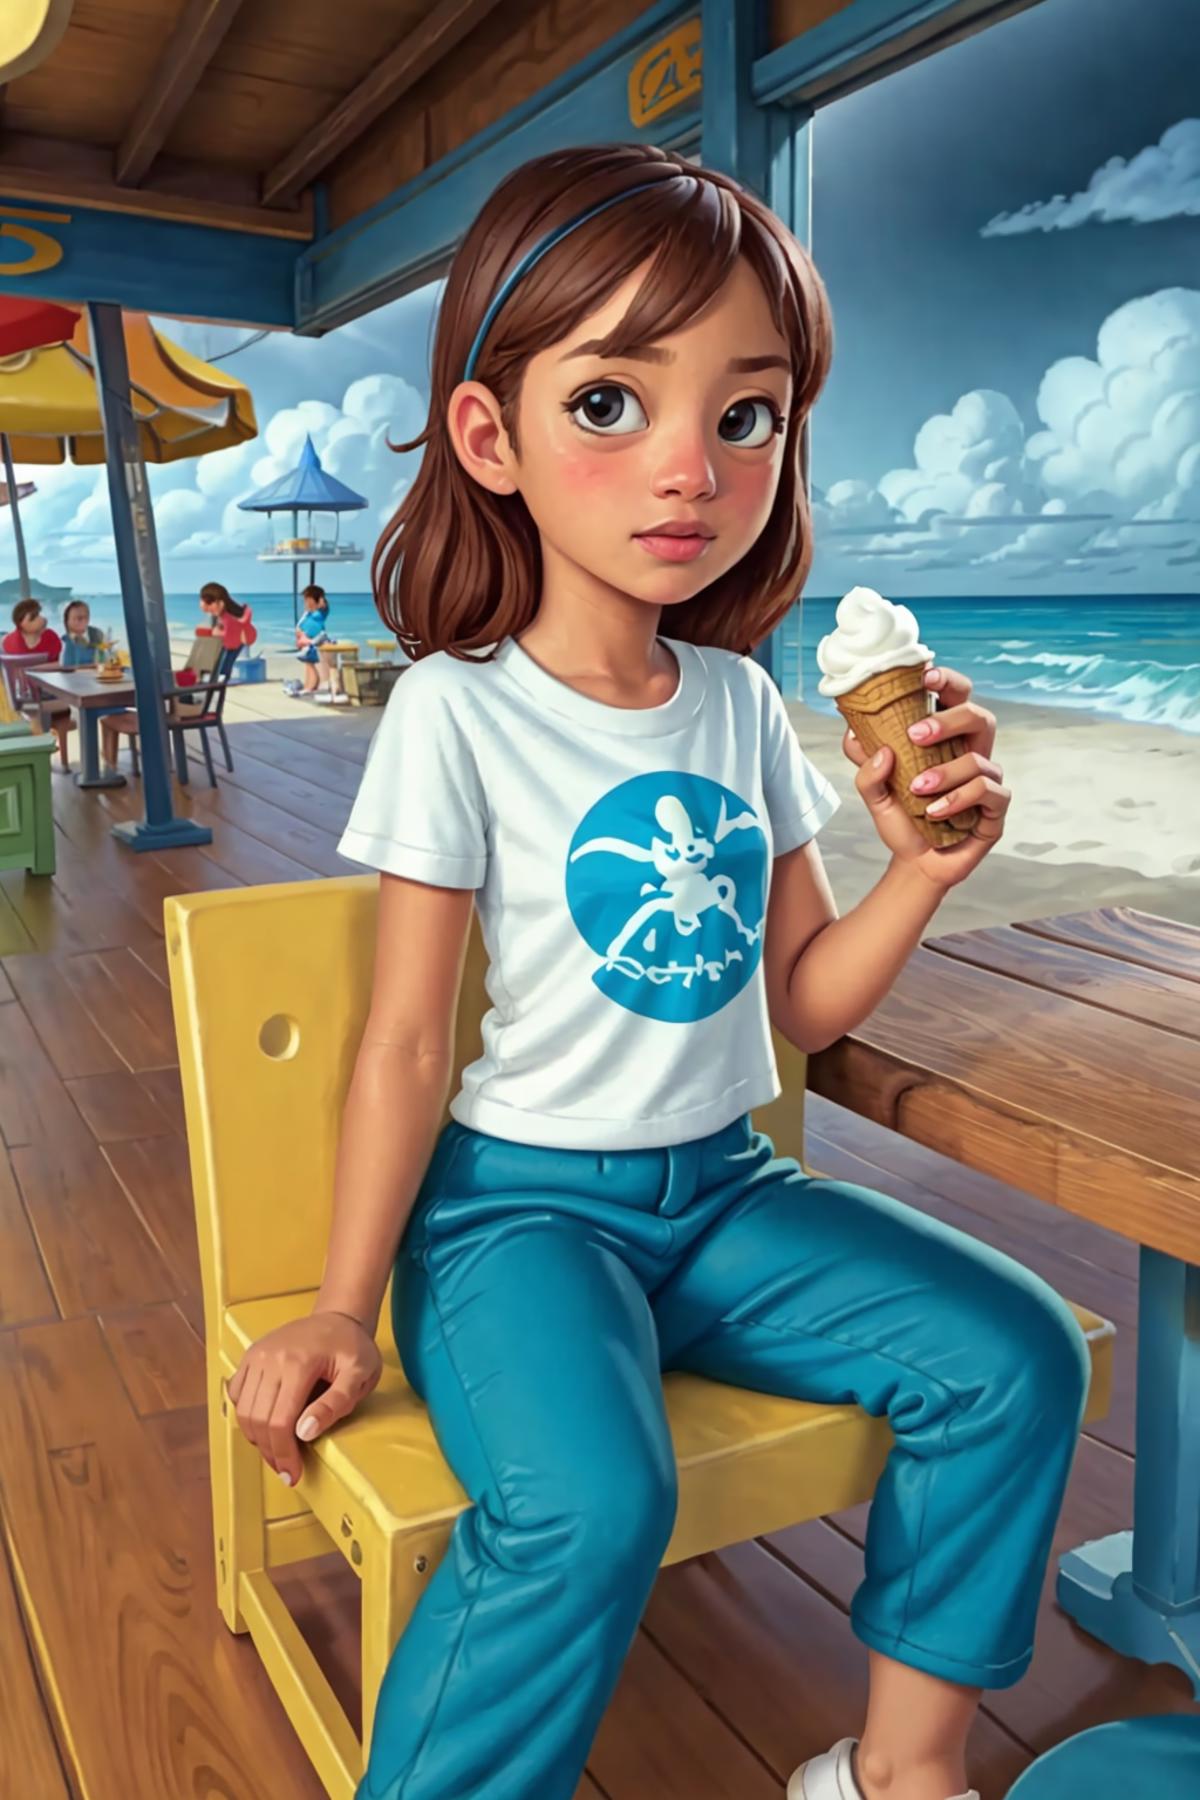 A young girl wearing a white shirt with a blue design is sitting on a yellow chair at a table. She is holding an ice cream cone in her hand. The scene appears to be set at a beach or a similar outdoor location.